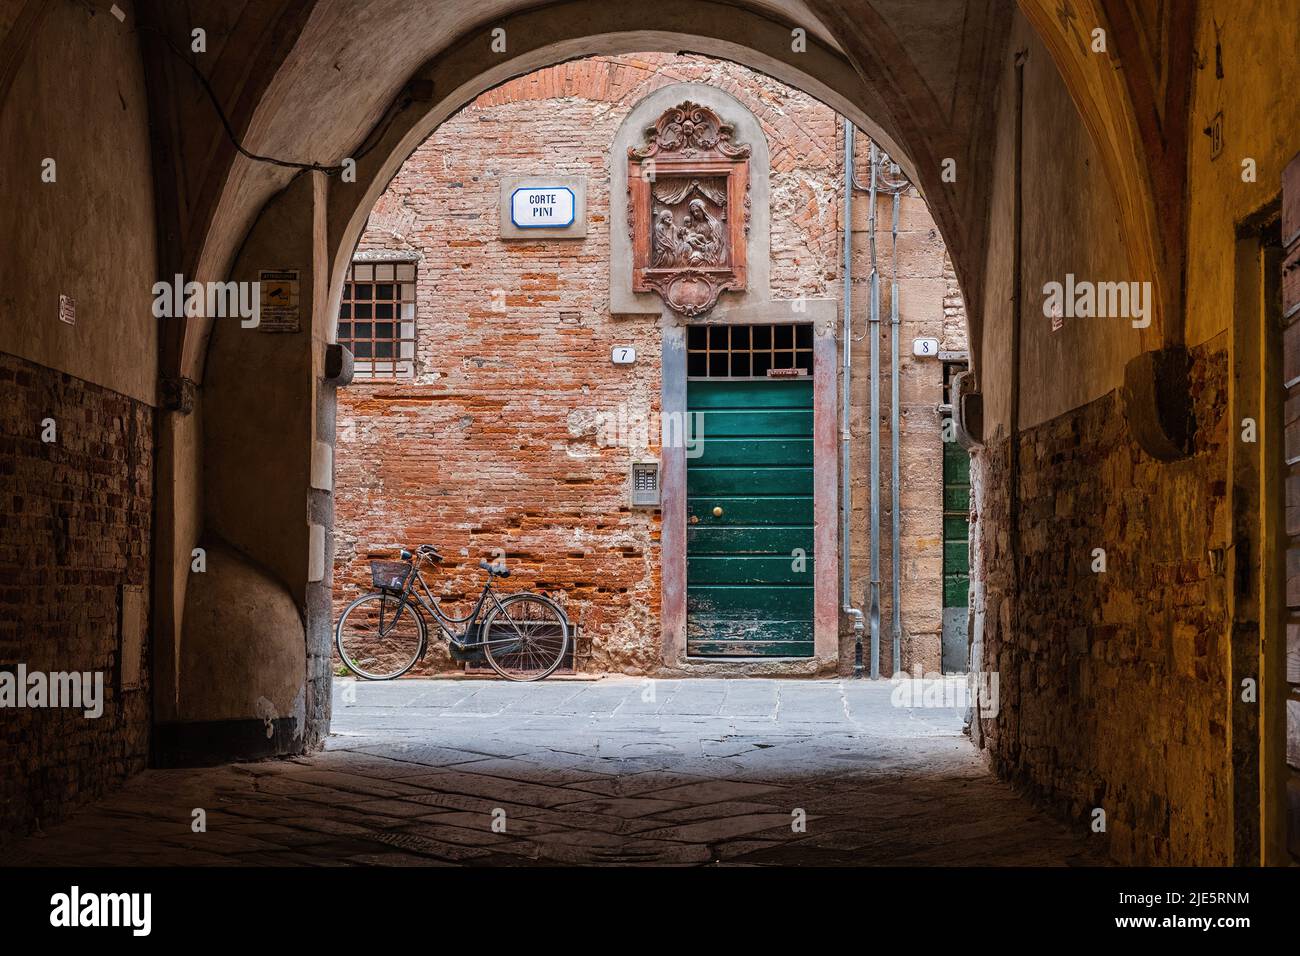 Lucca, Italy - 6/8/2022: Bicycle at rest in traditional Tuscan courtyard in Lucca, Italy. Stock Photo